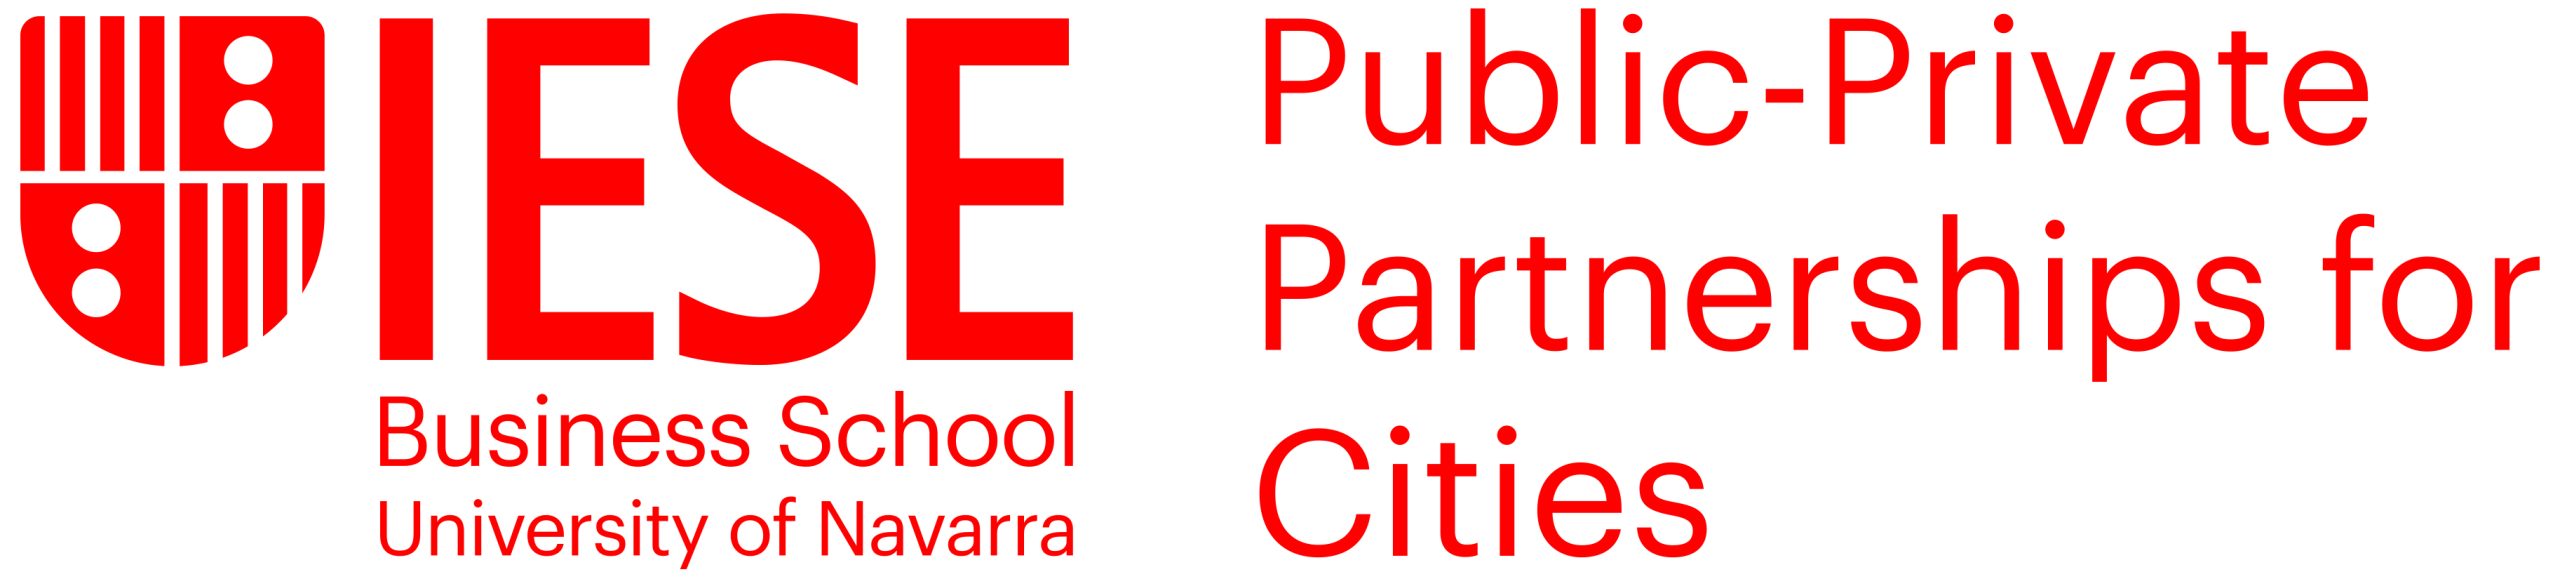 Public-Private Partnerships for Cities-LOGO-R